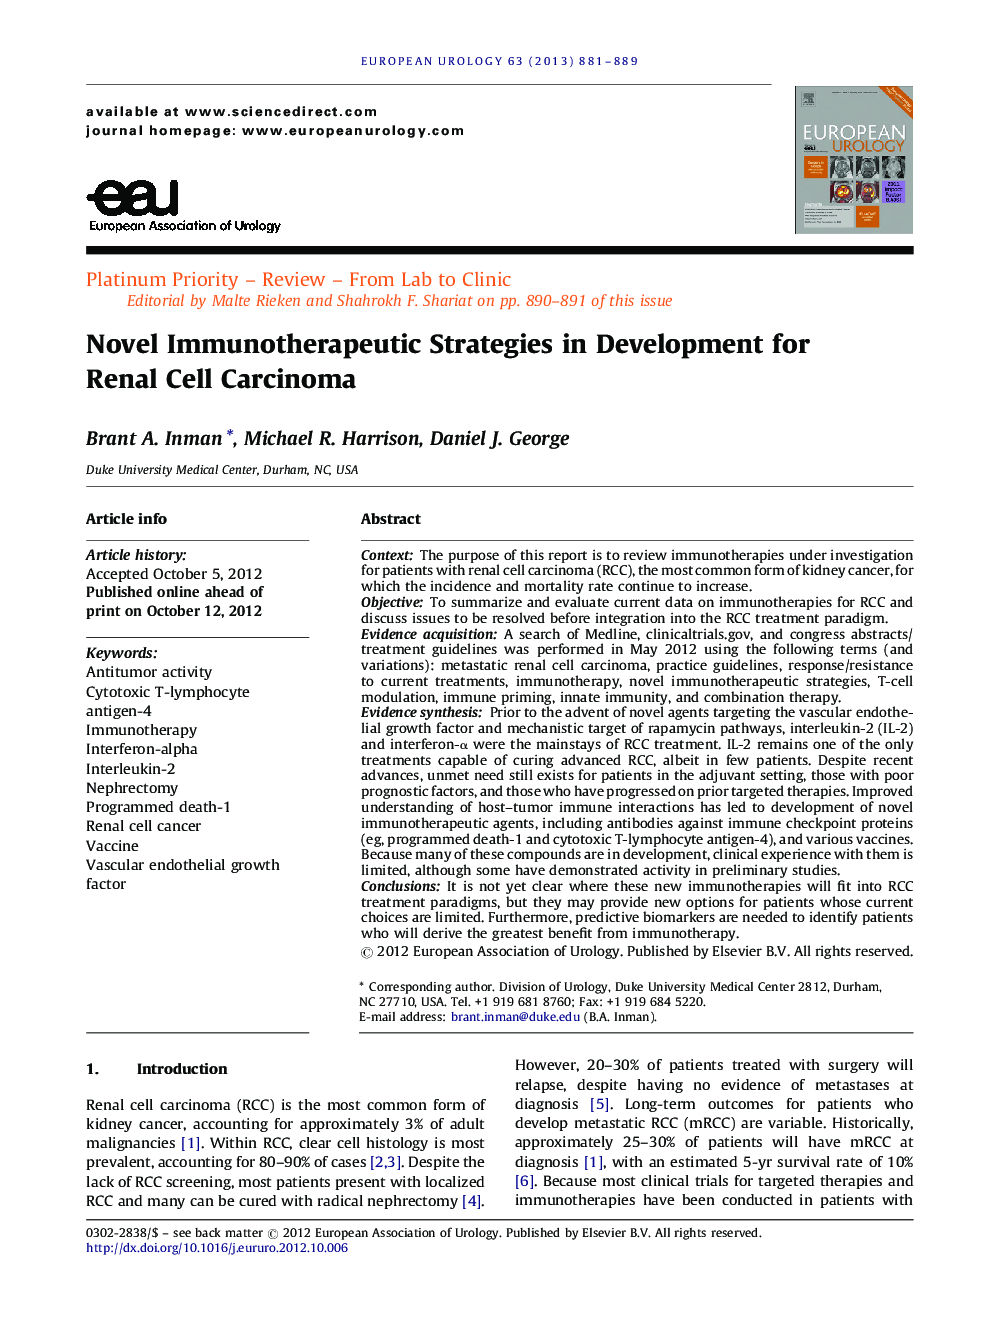 Novel Immunotherapeutic Strategies in Development for Renal Cell Carcinoma